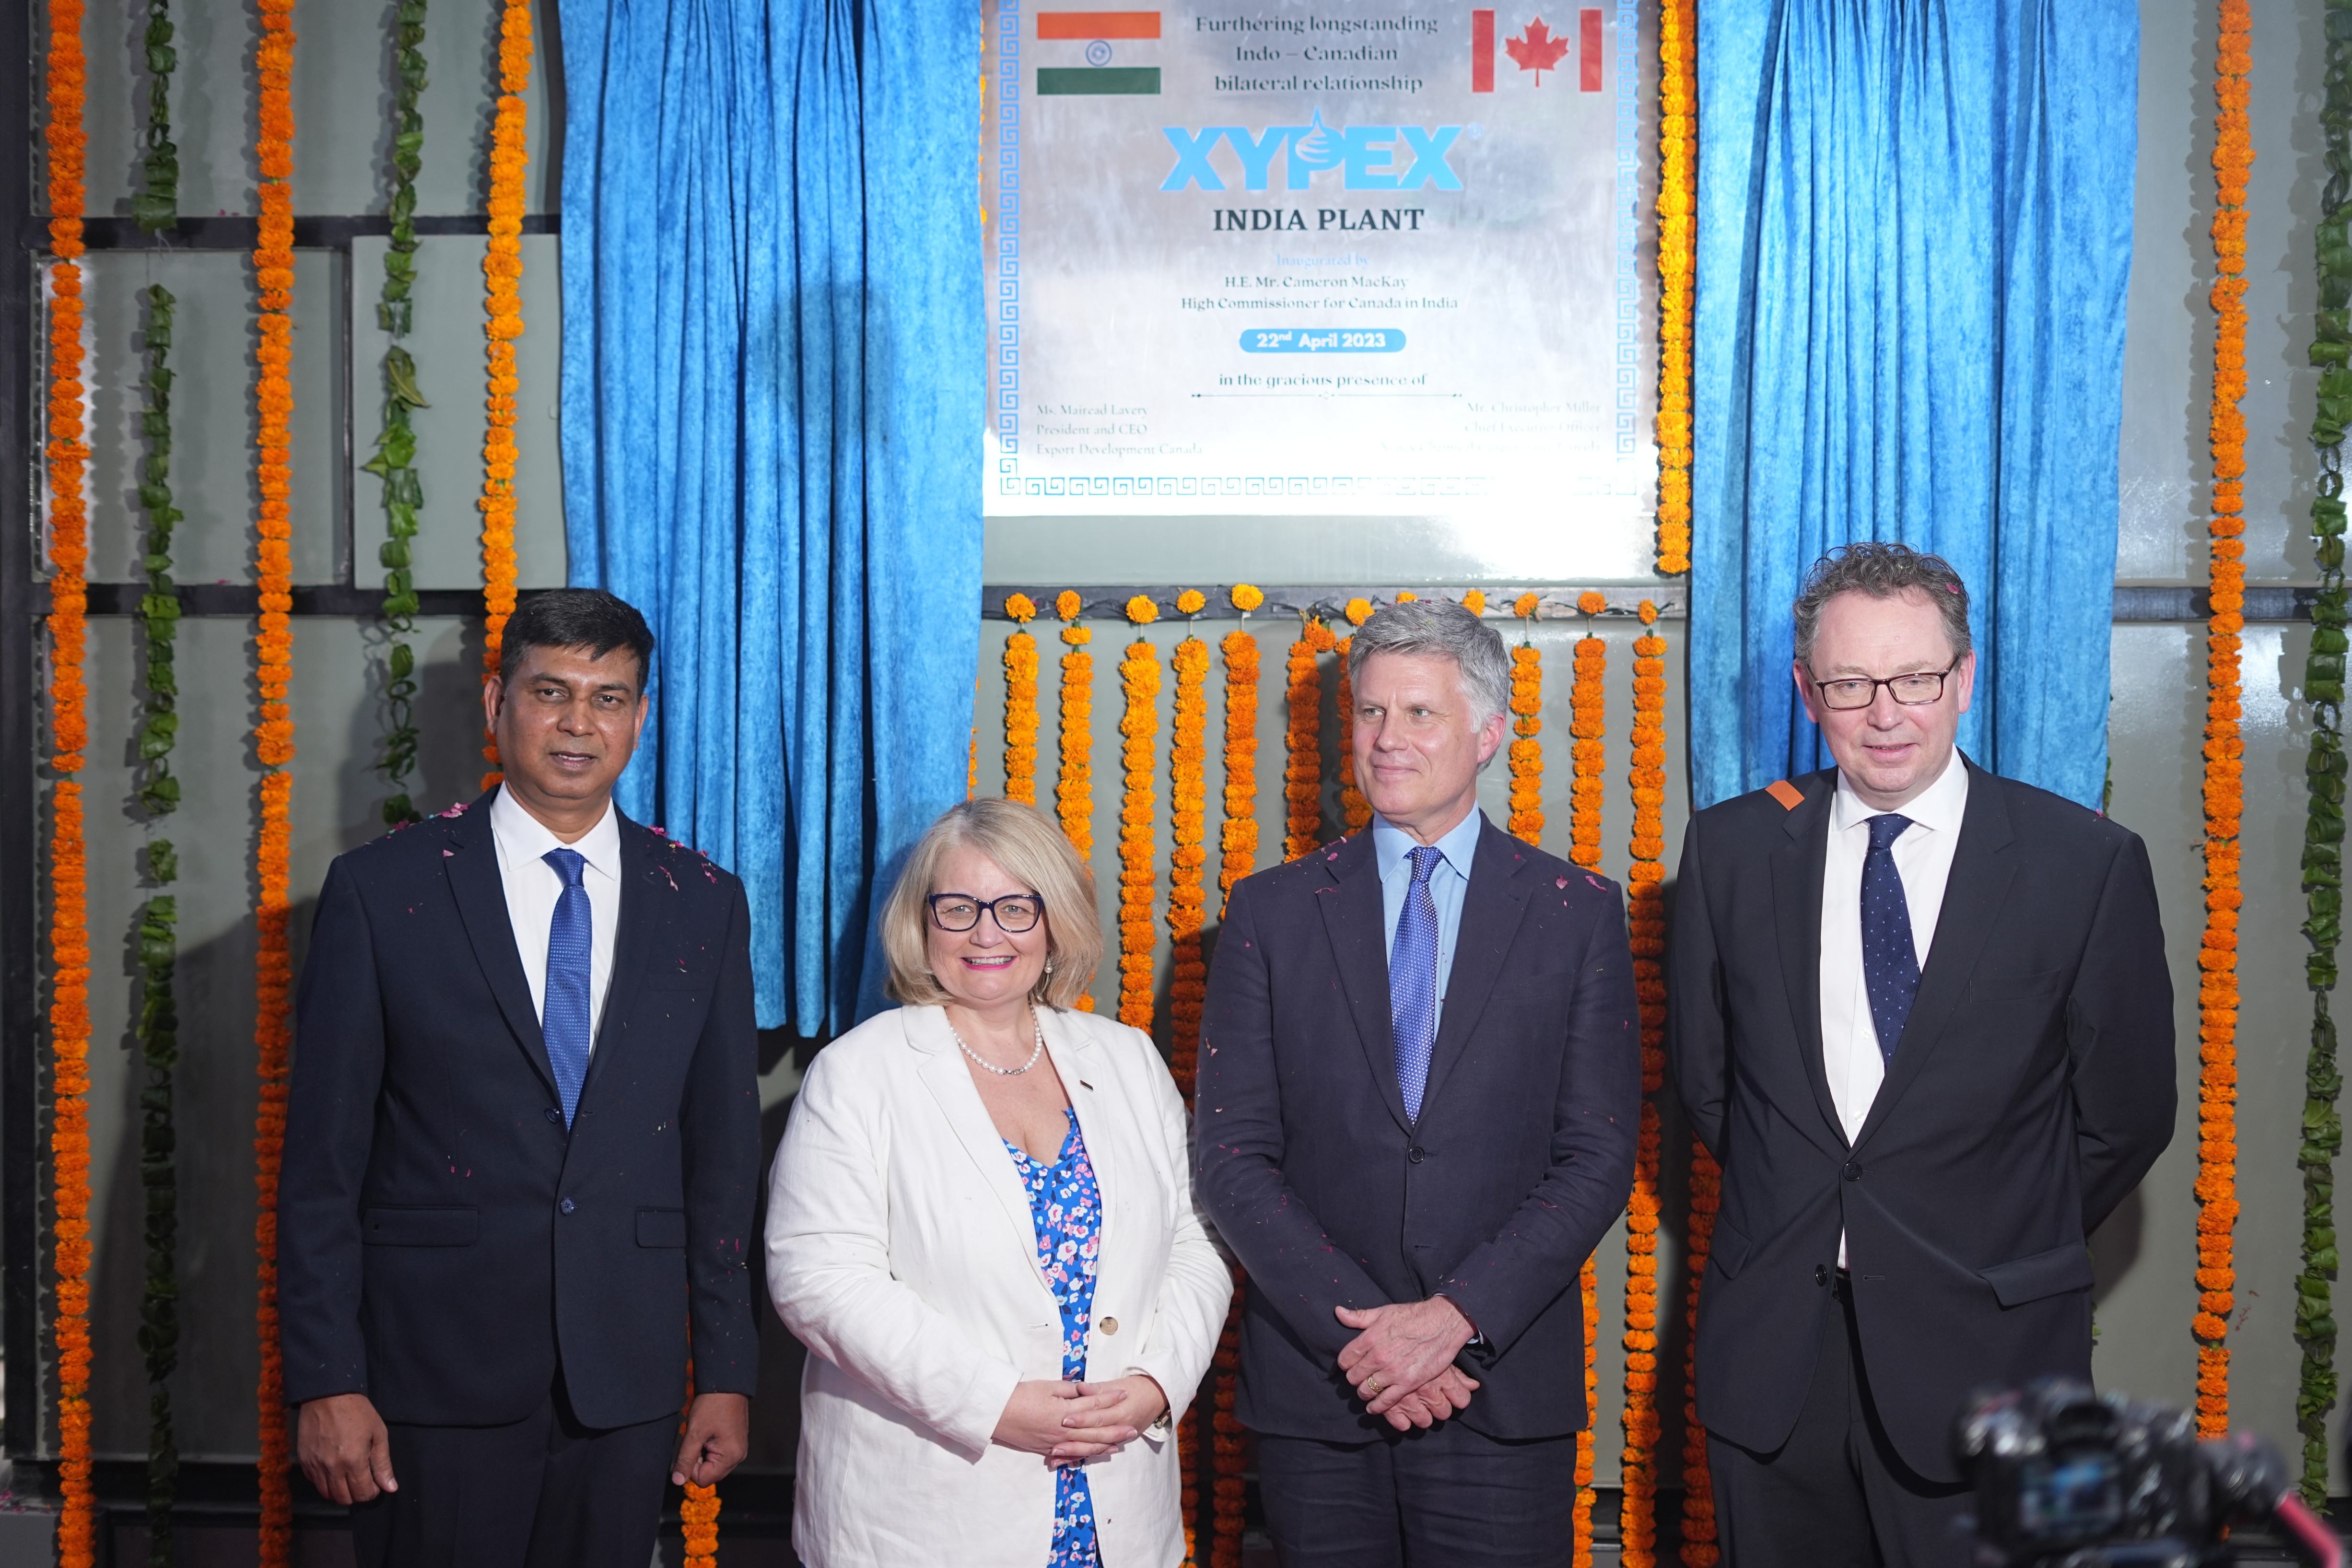 Vancouver-Based Xypex Chemical Corporation Xypex First Plant in India